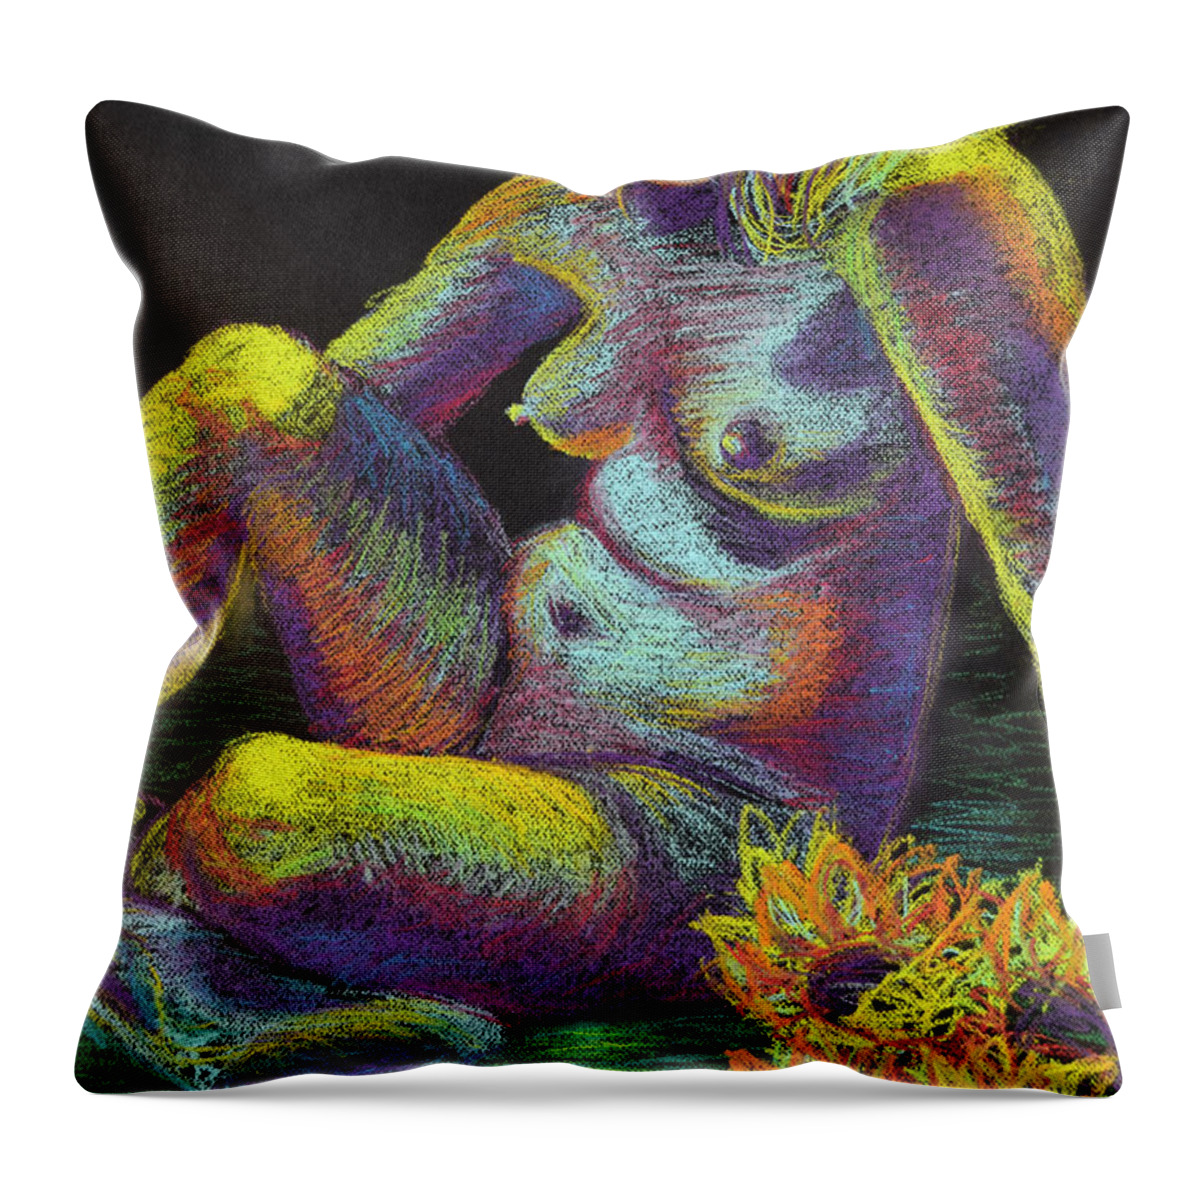 Pastel Painting Throw Pillow featuring the pastel Taylor by Rowan Lyford